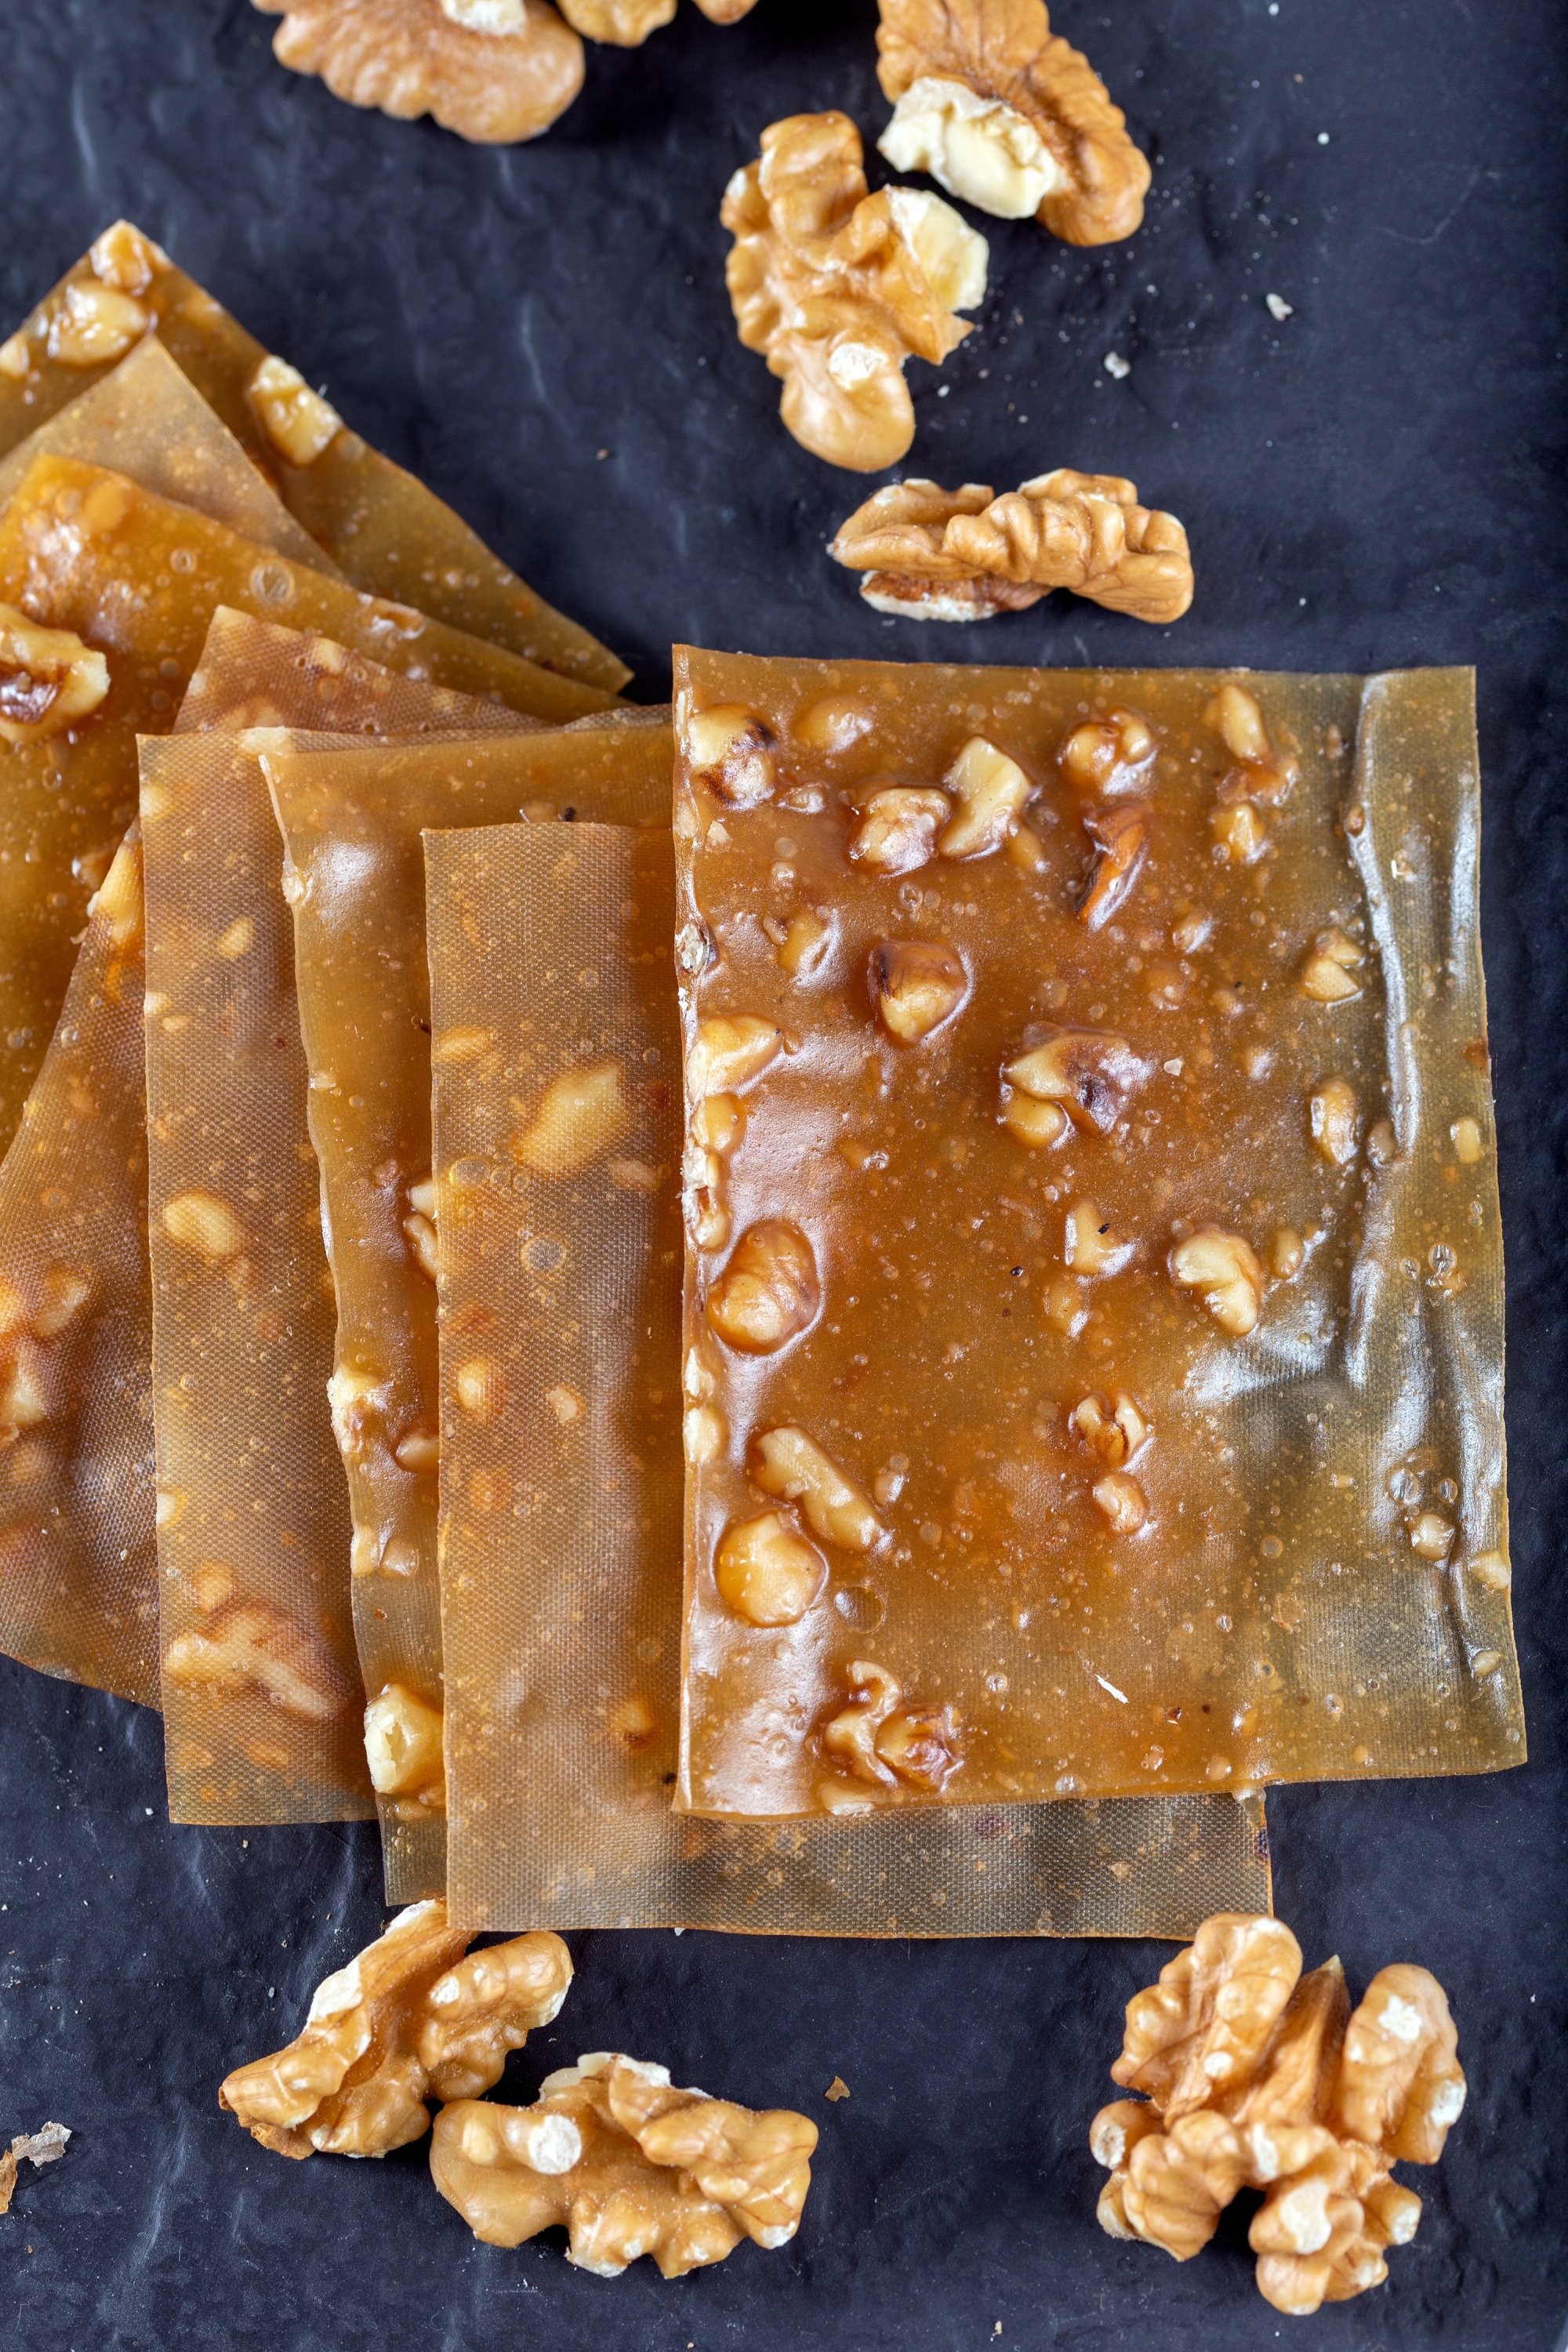 Pestil is basically dried fruit pulp with walnuts or other sesame seeds.